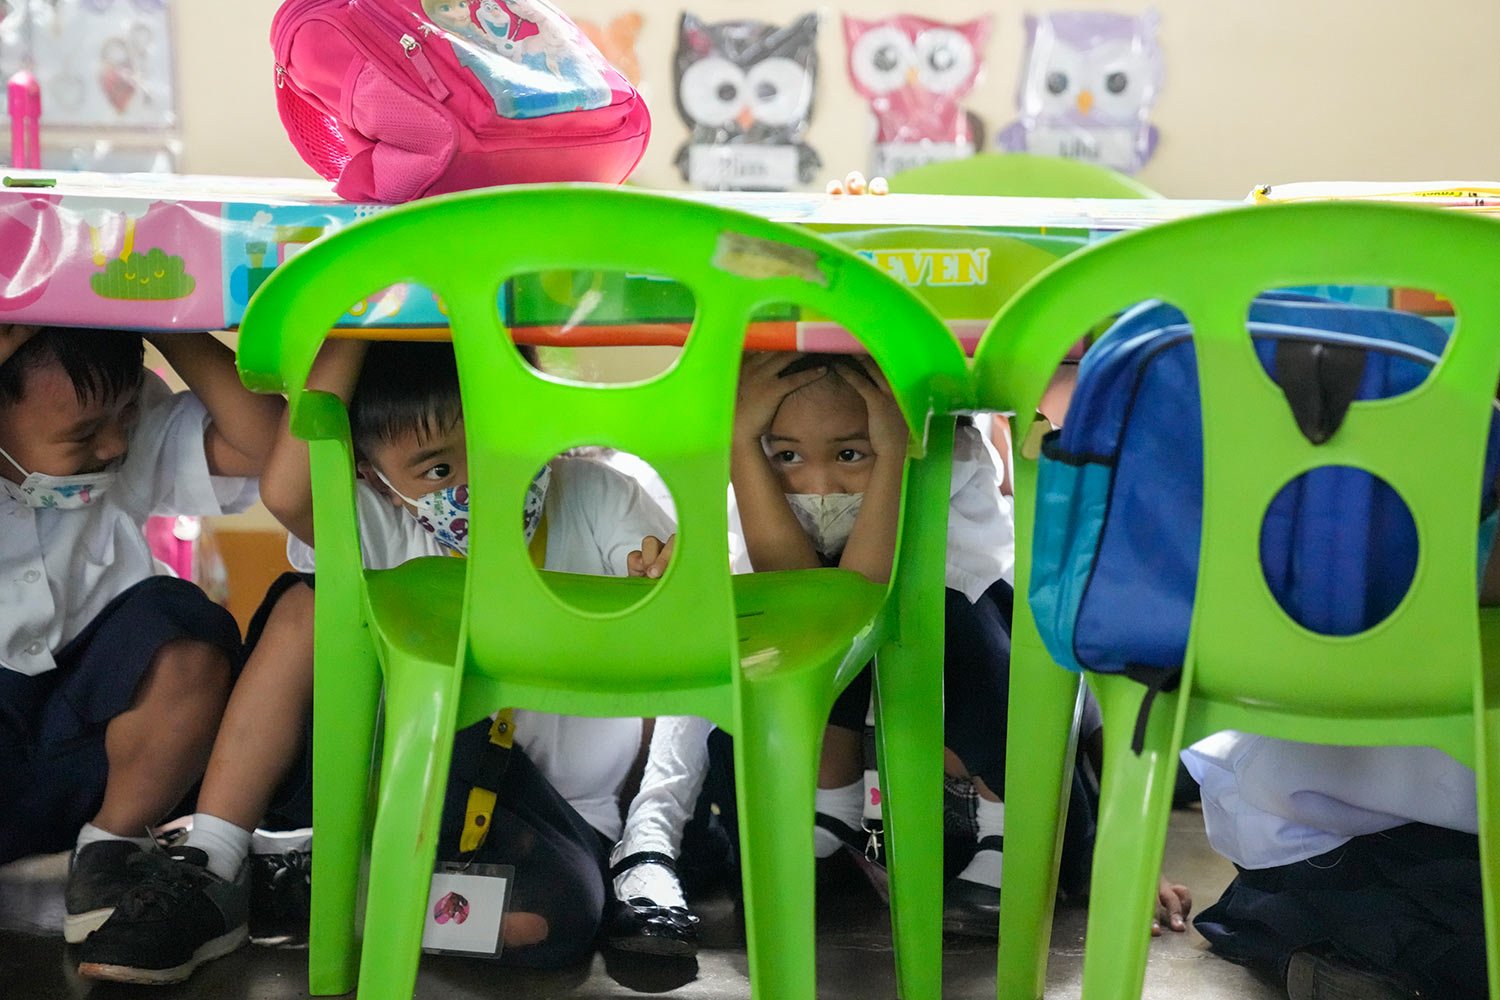  Students duck under a table during an earthquake drill at an elementary school in Metro Manila, Philippines on Thursday Sept. 8, 2022. (AP Photo/Aaron Favila) 